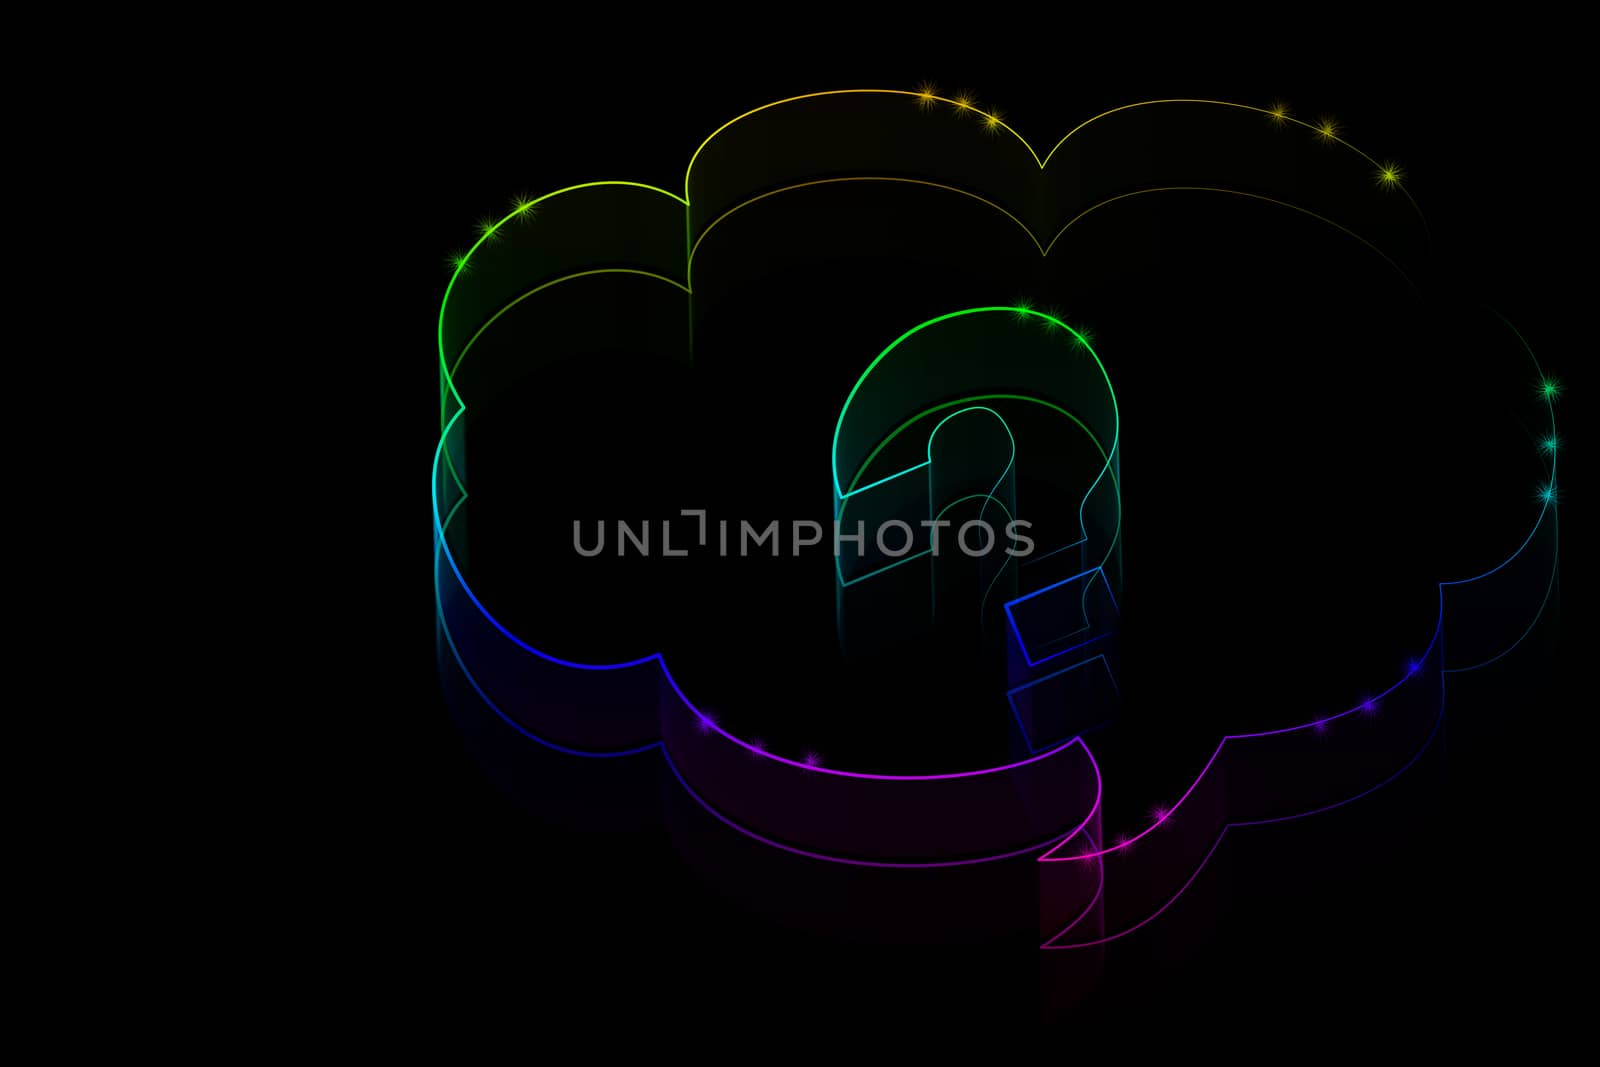 Neon question mark symbol on a black background